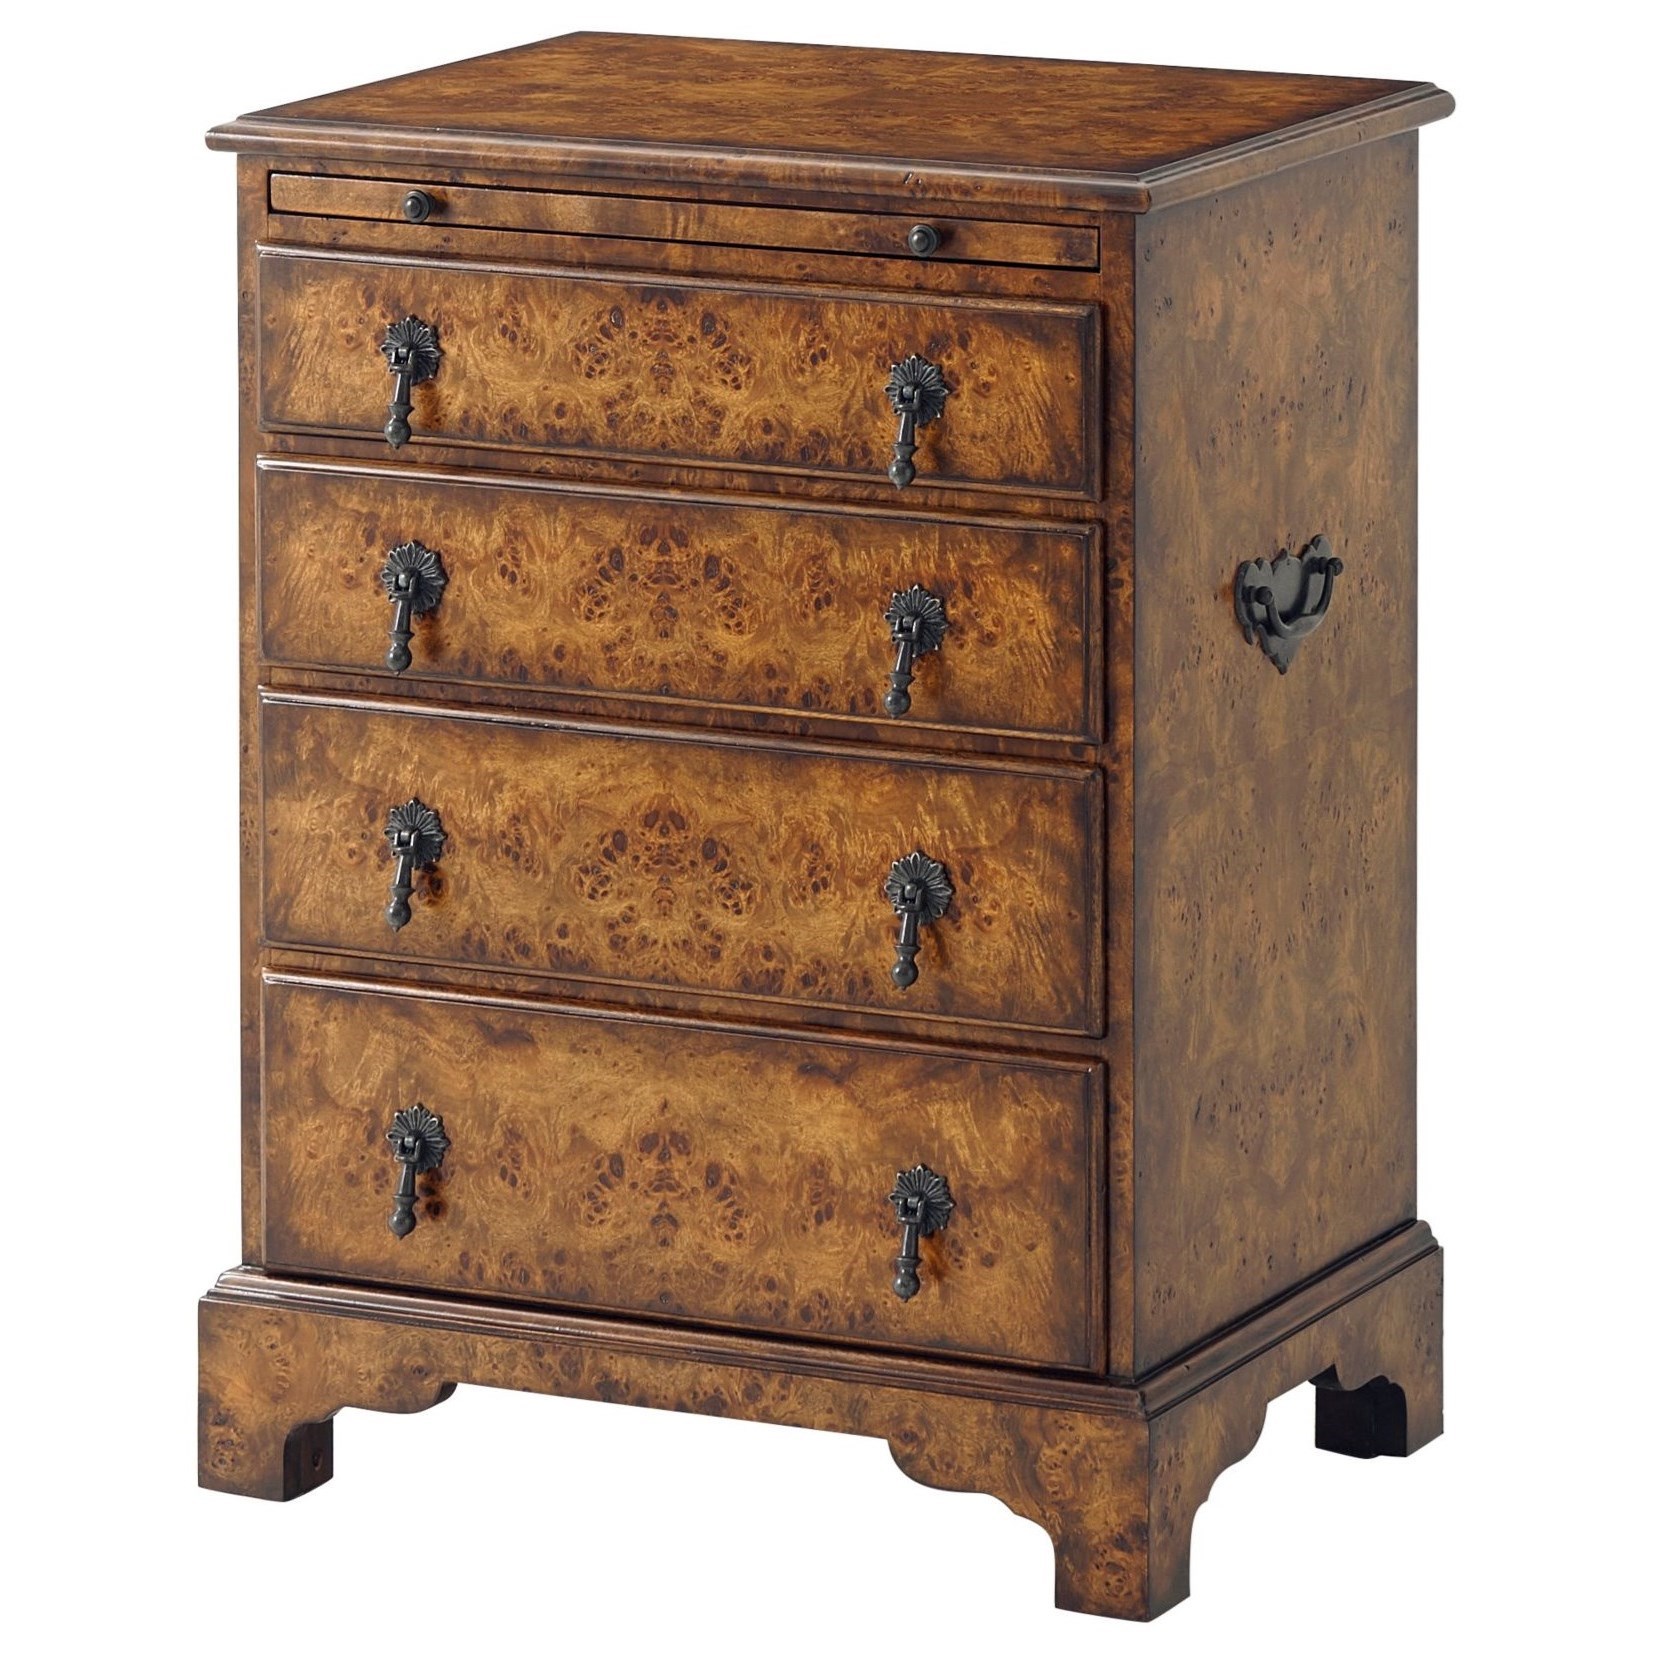 A Bachelor's Chest with Poplar Burl and Pullout Leather Inset Shelf